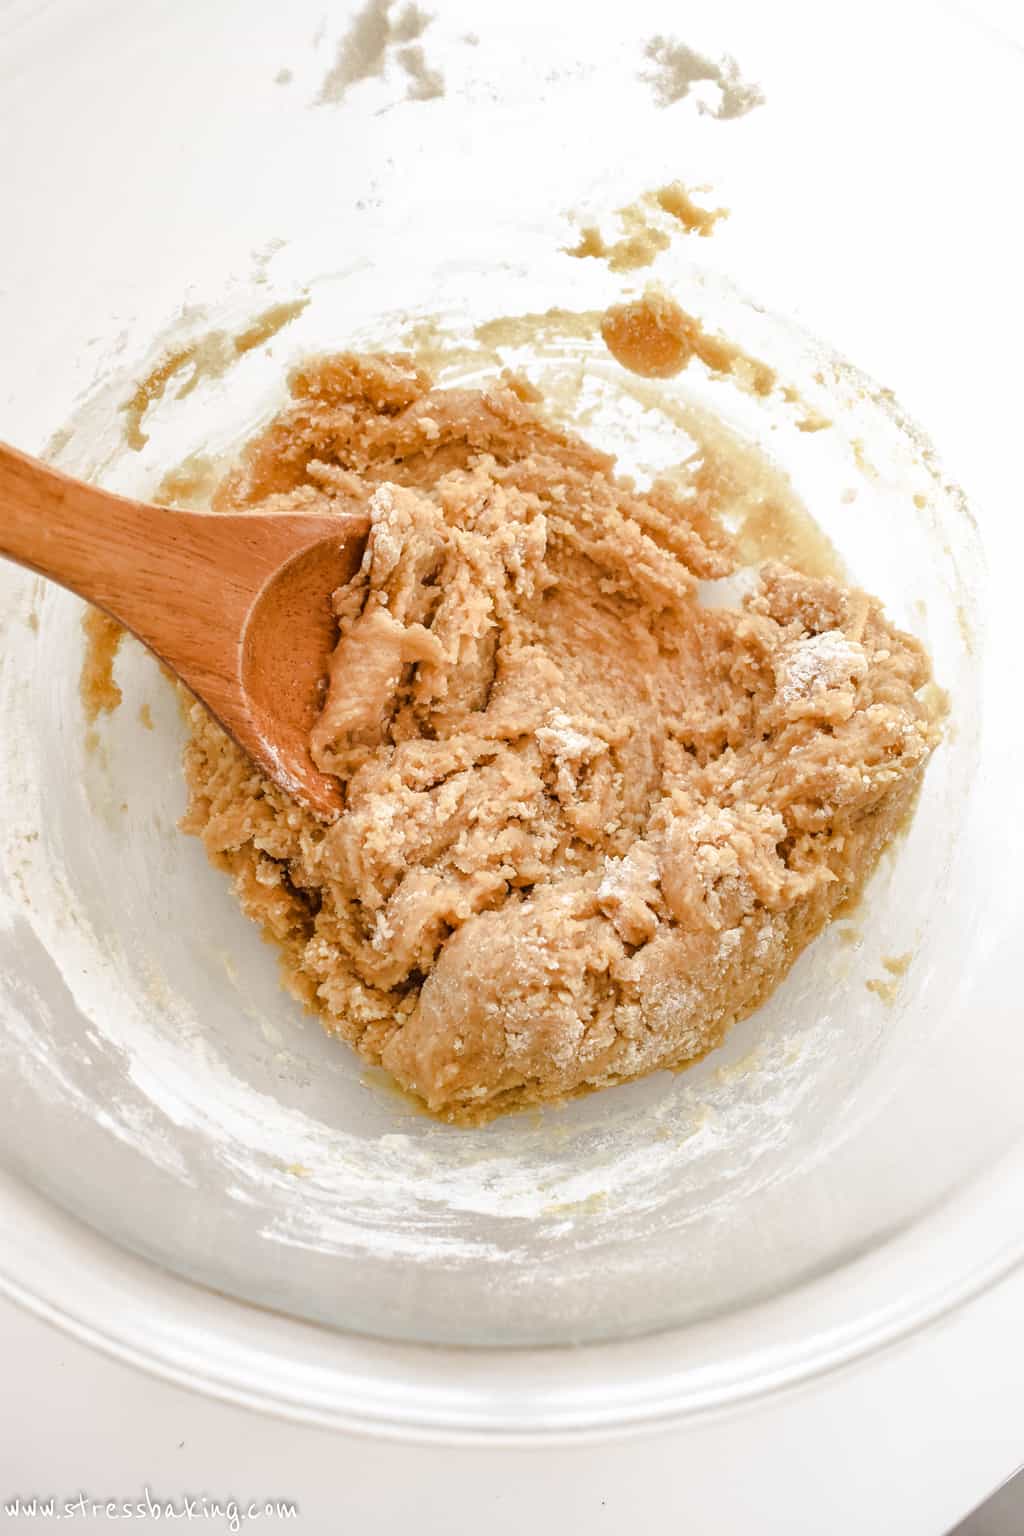 Tan cookie dough being mixed with a wooden spoon in a clear bowl